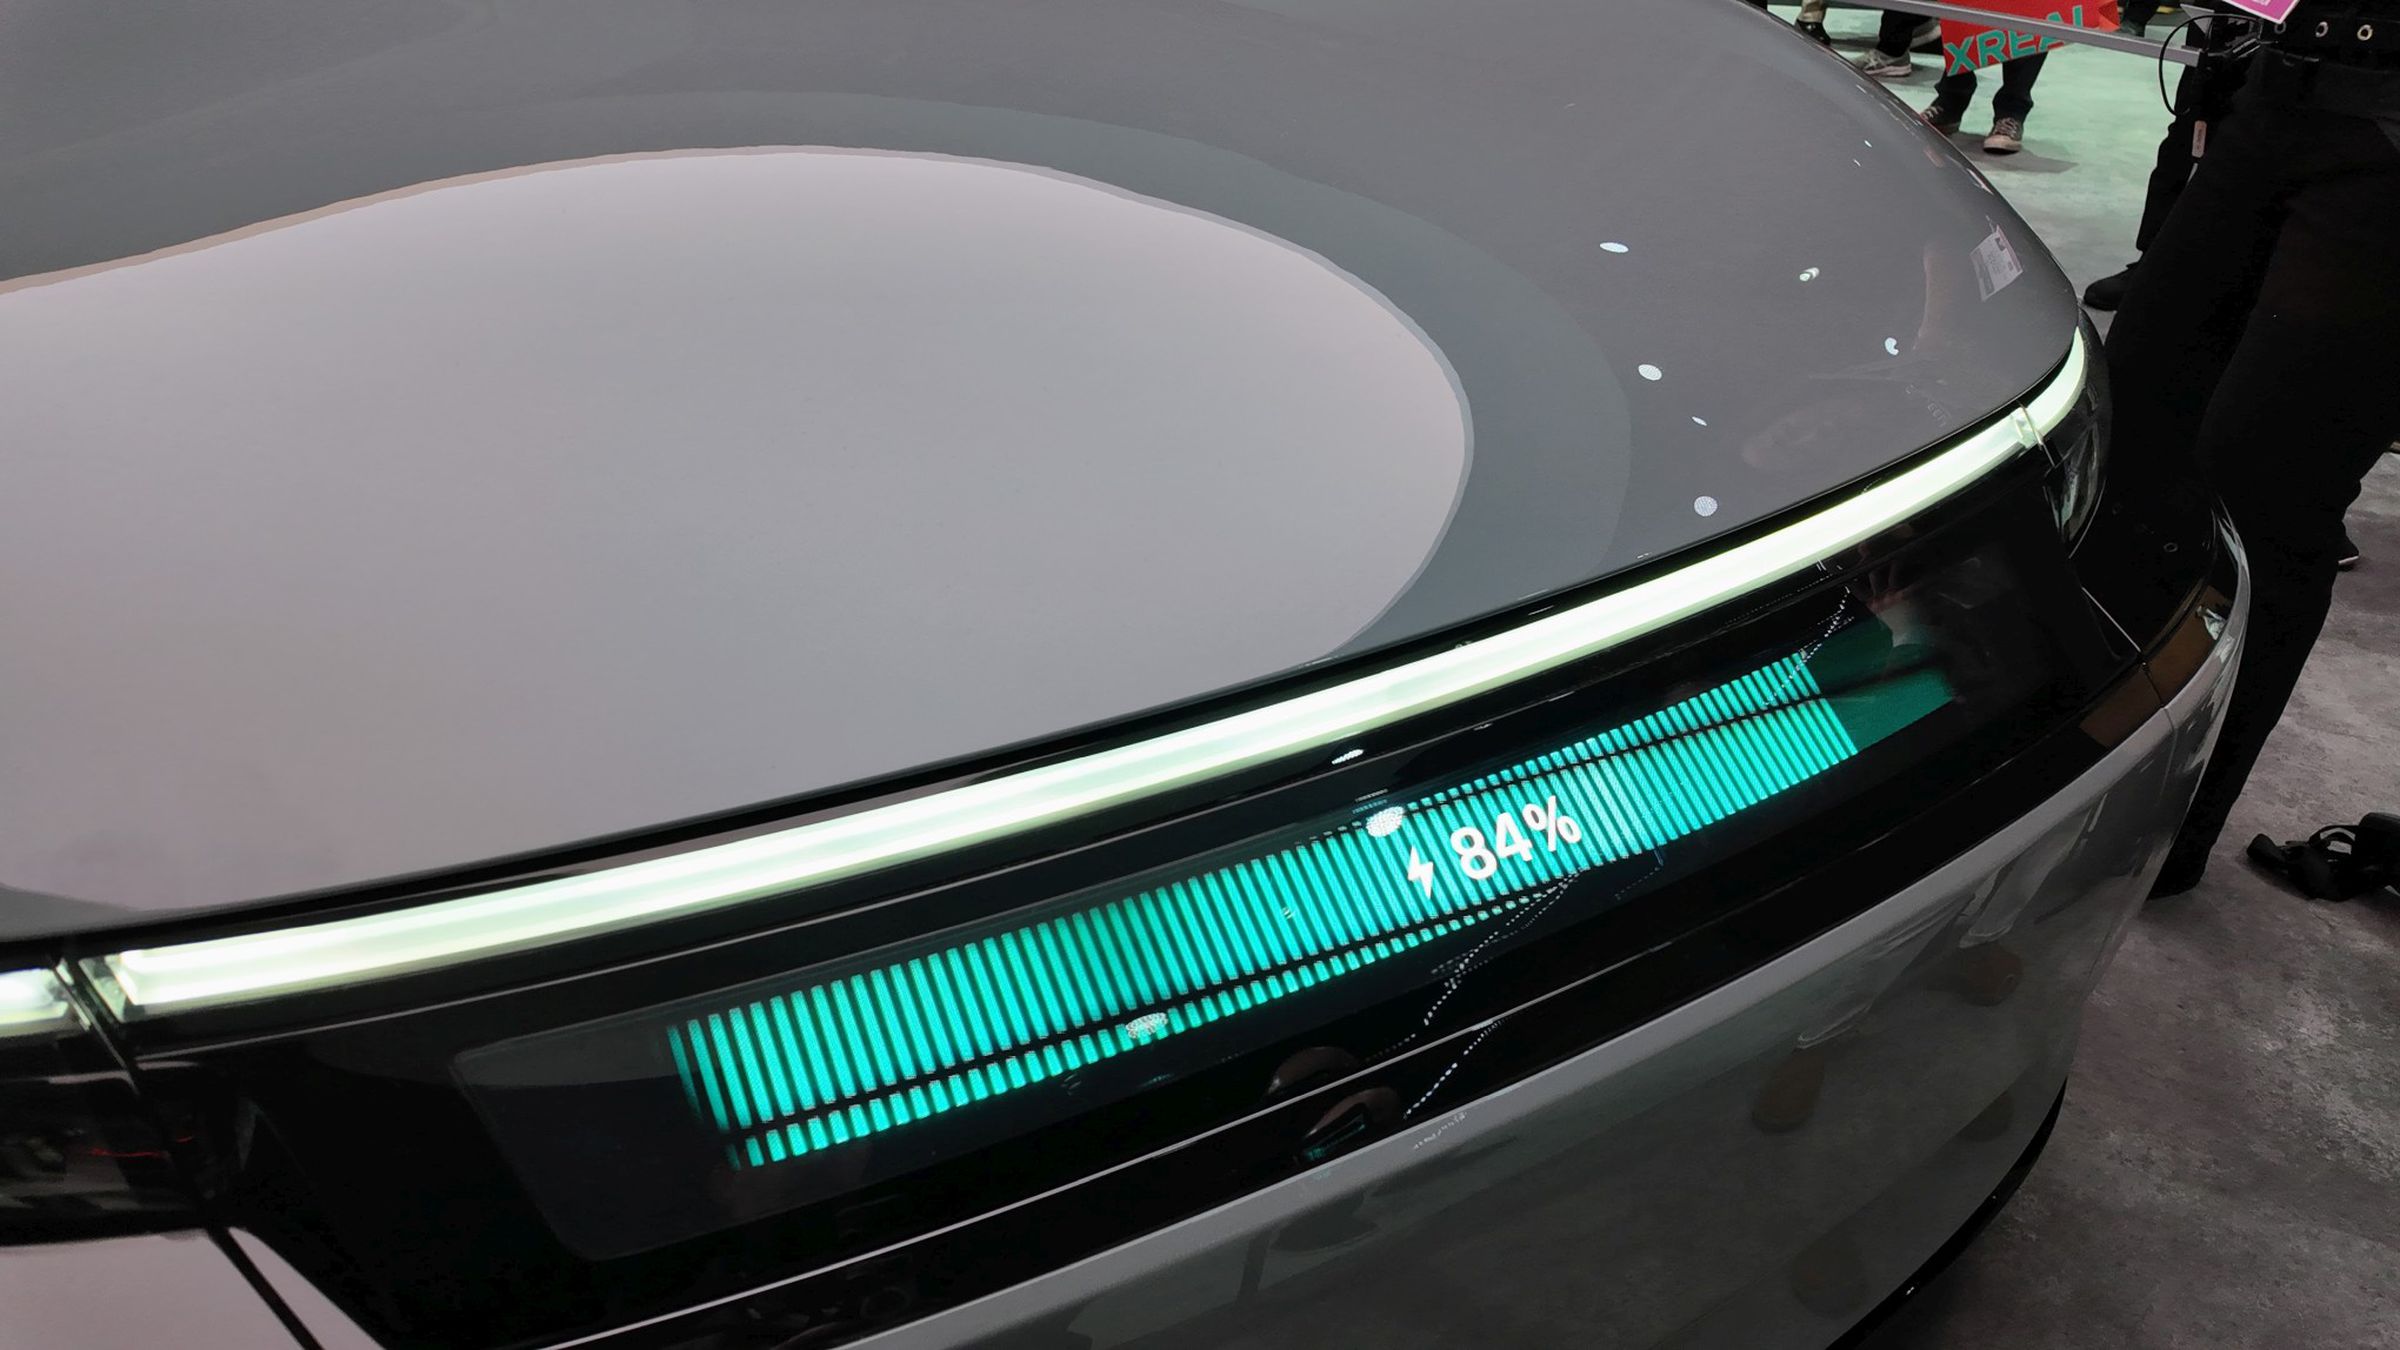 <em>The only useful feature we saw on the front bumper screen: the battery’s state of charge. It’s in the green (teal?) at 84 percent.</em>